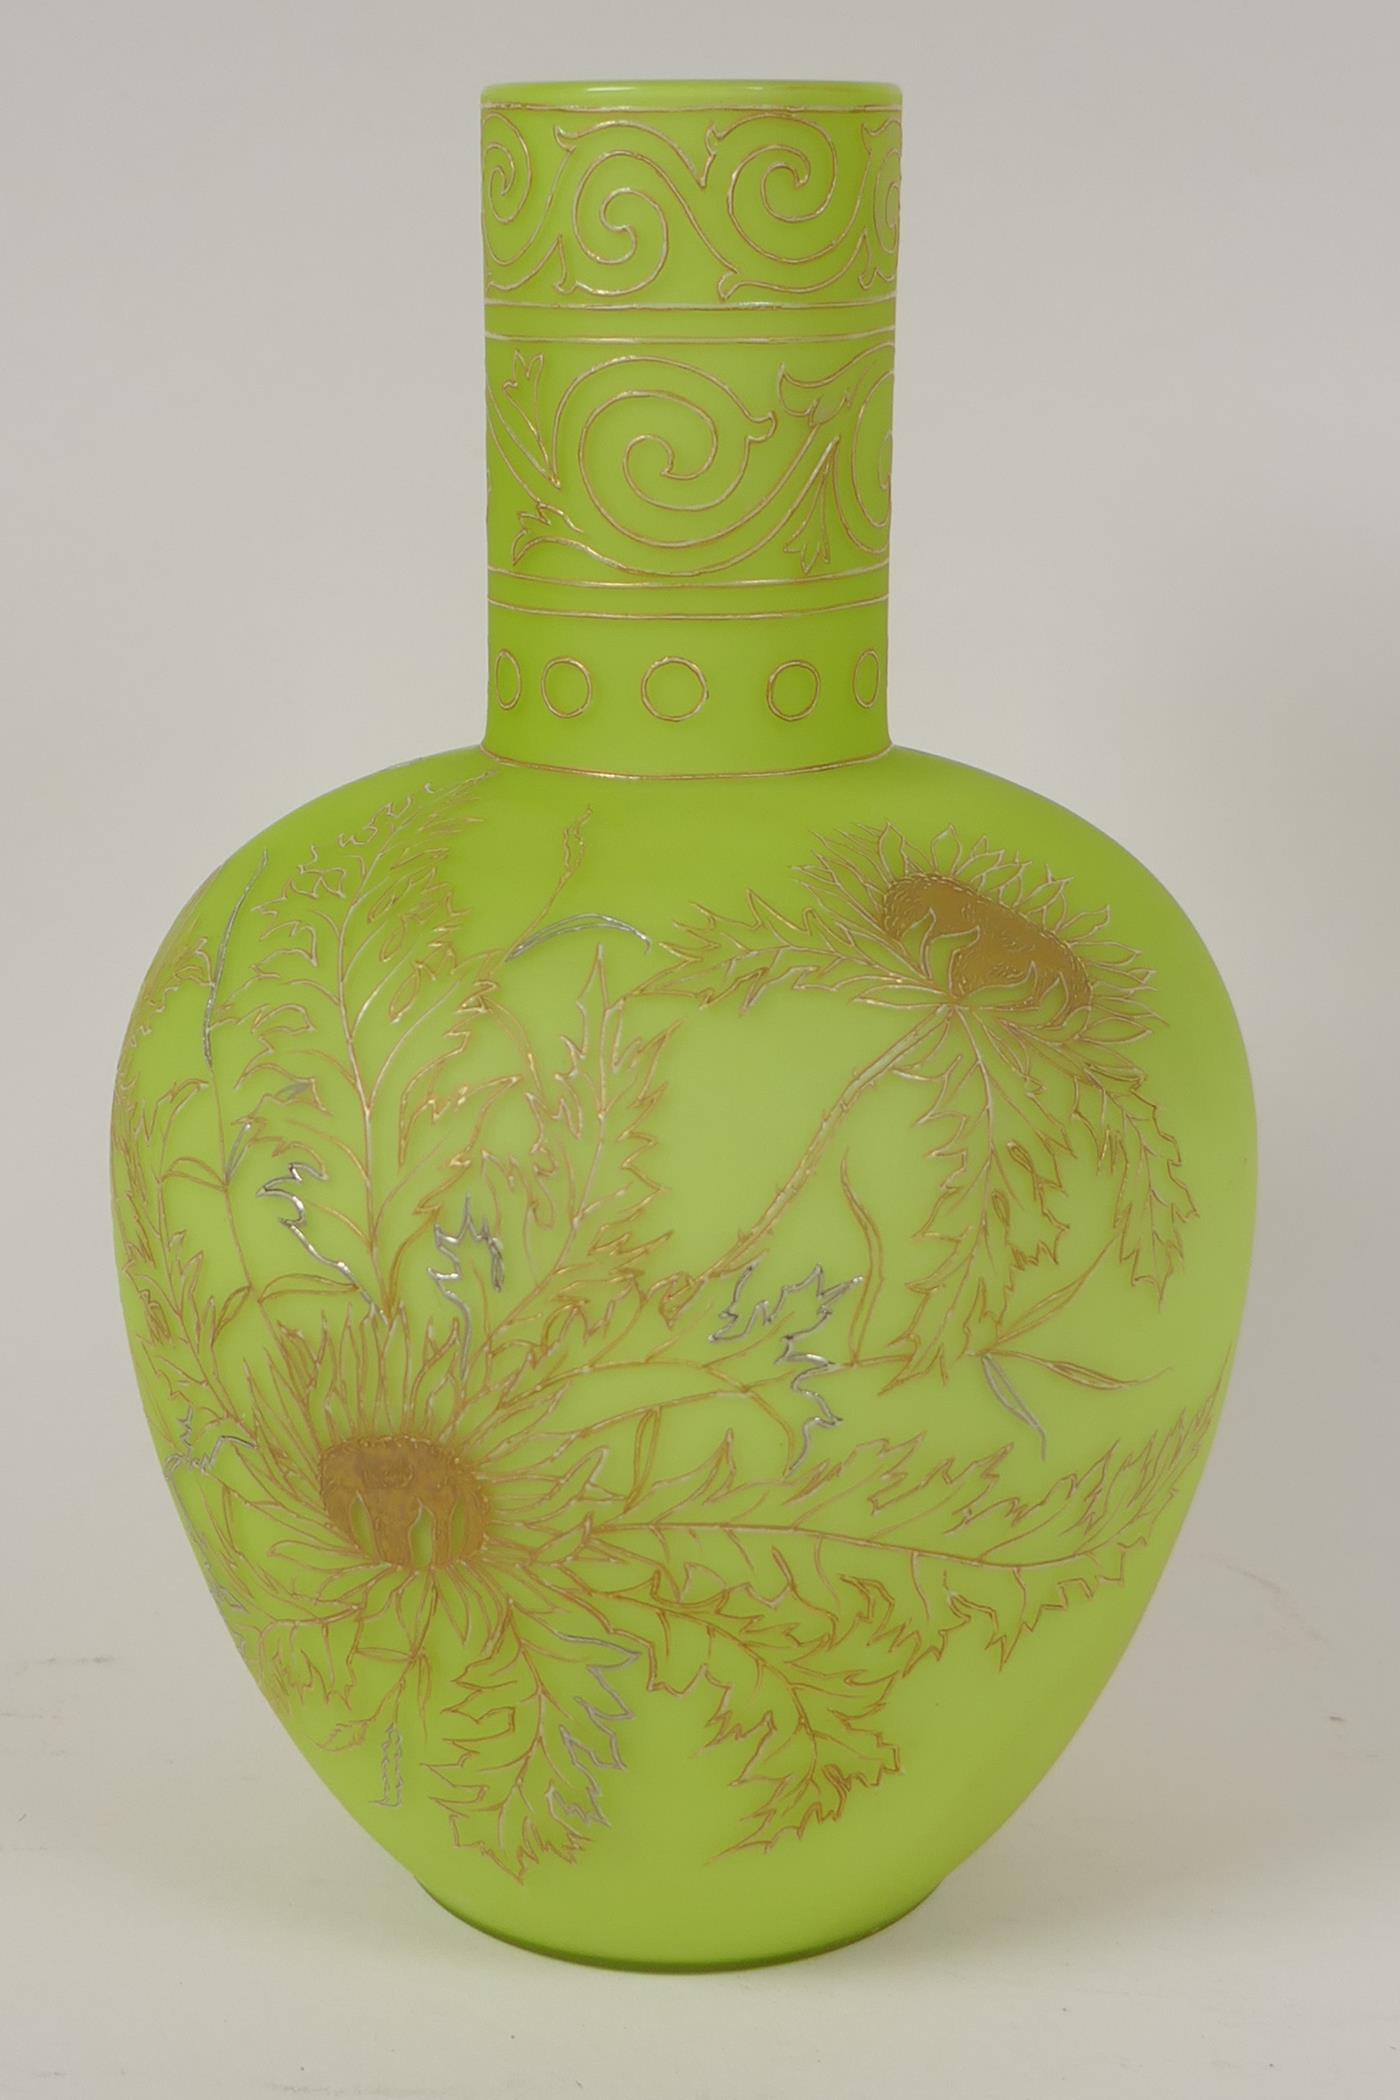 A C19th satin glass vase with delicate applied gilt floral decoration 10" high - Image 2 of 6